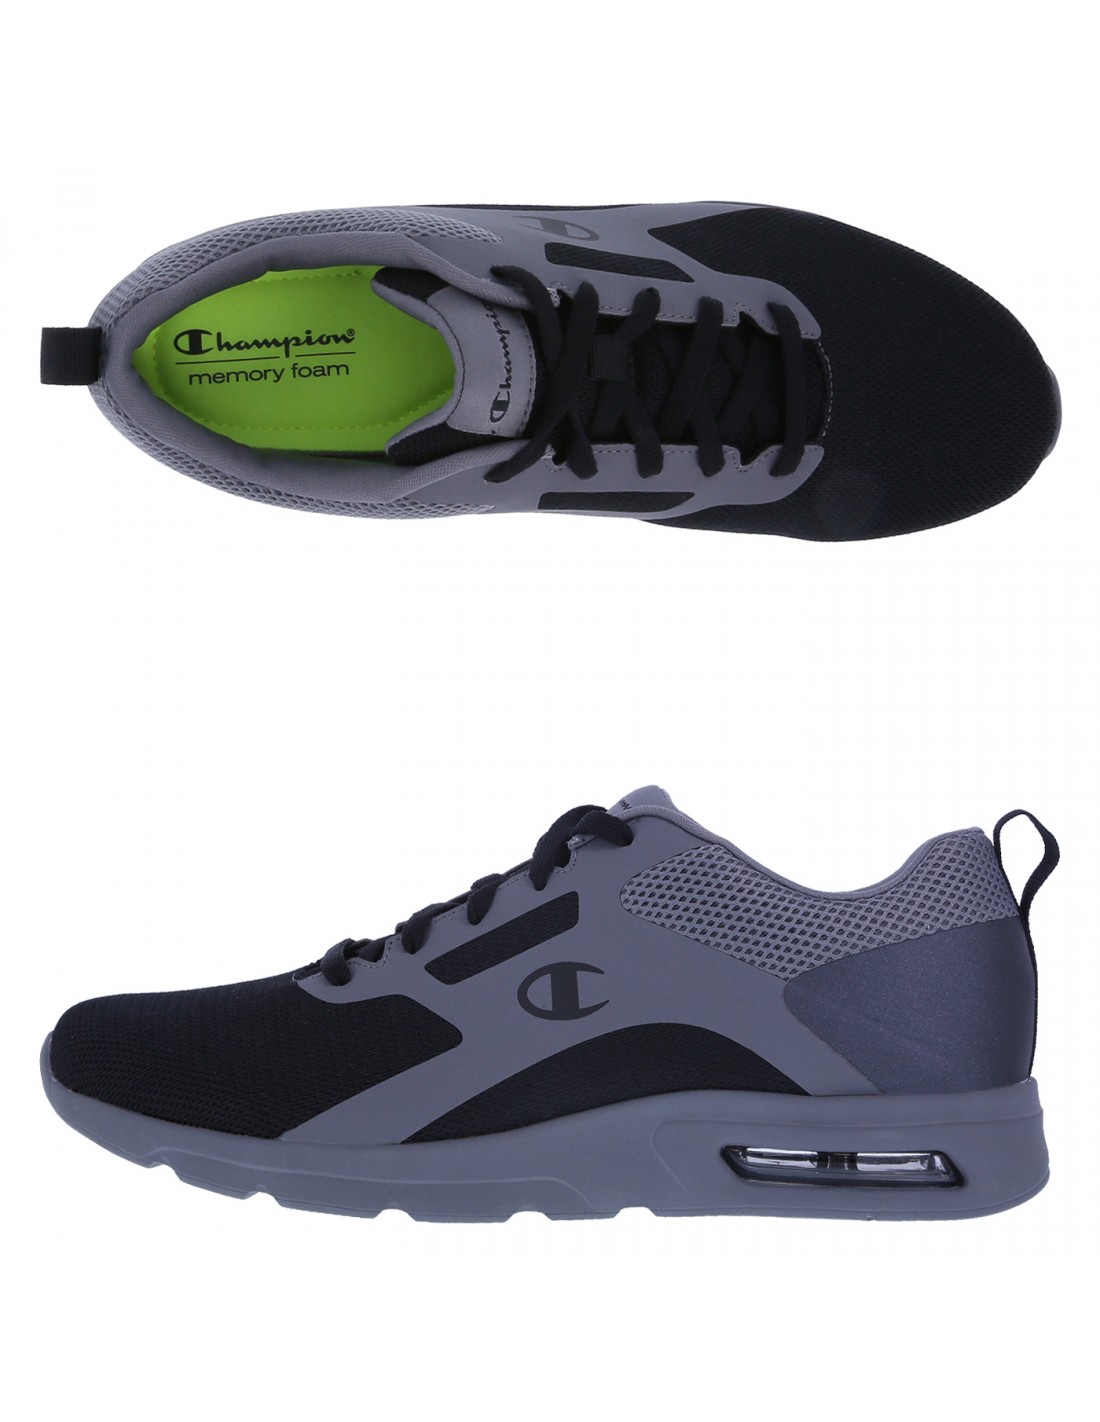 payless black tennis shoes